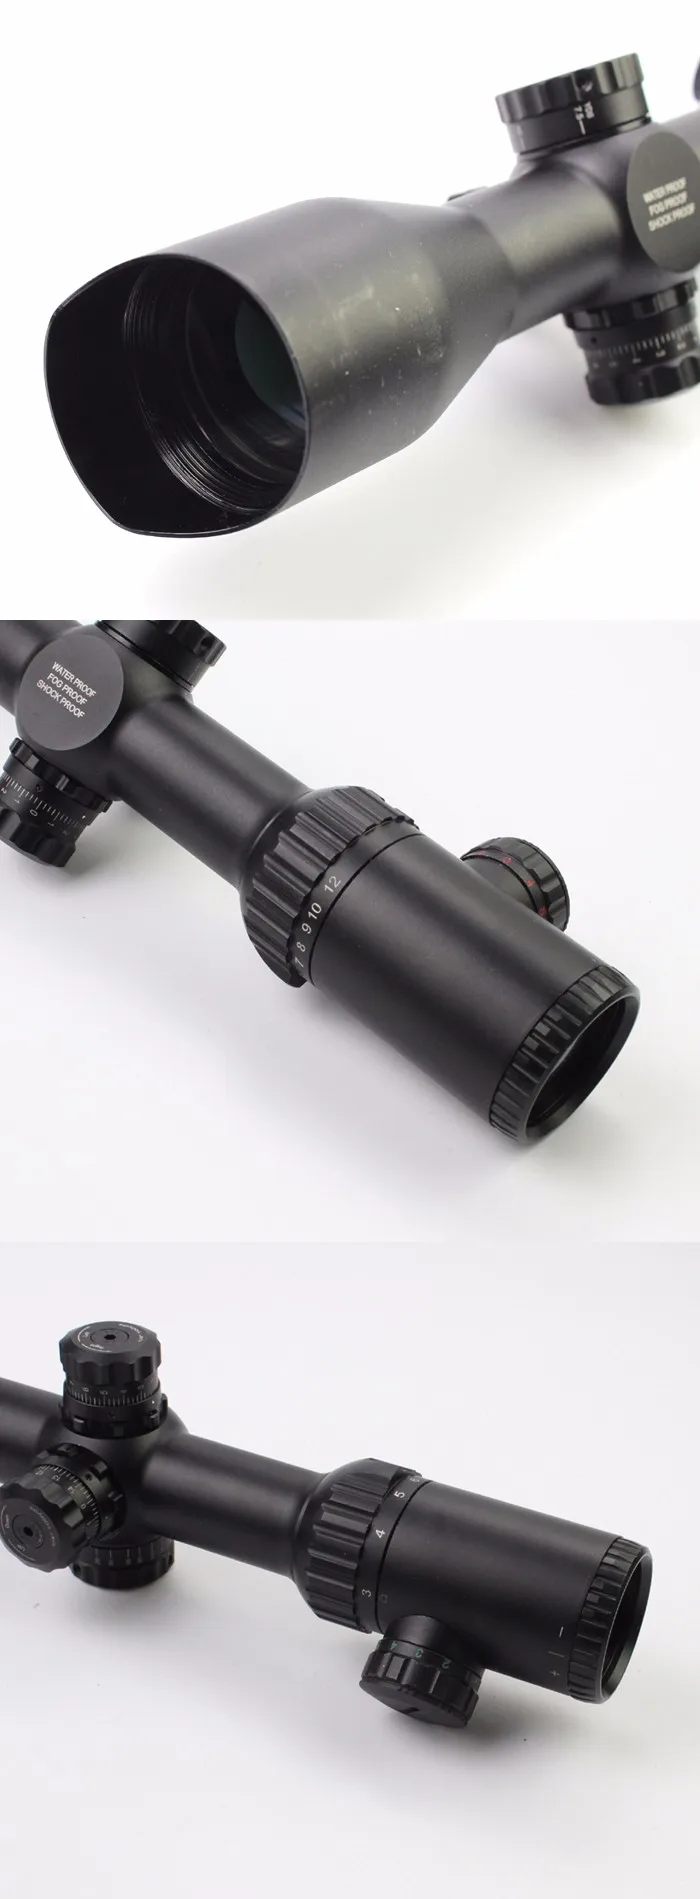 3-12X42SF riflescope R and G illumination adjusts and eyepiece part groups.jpg